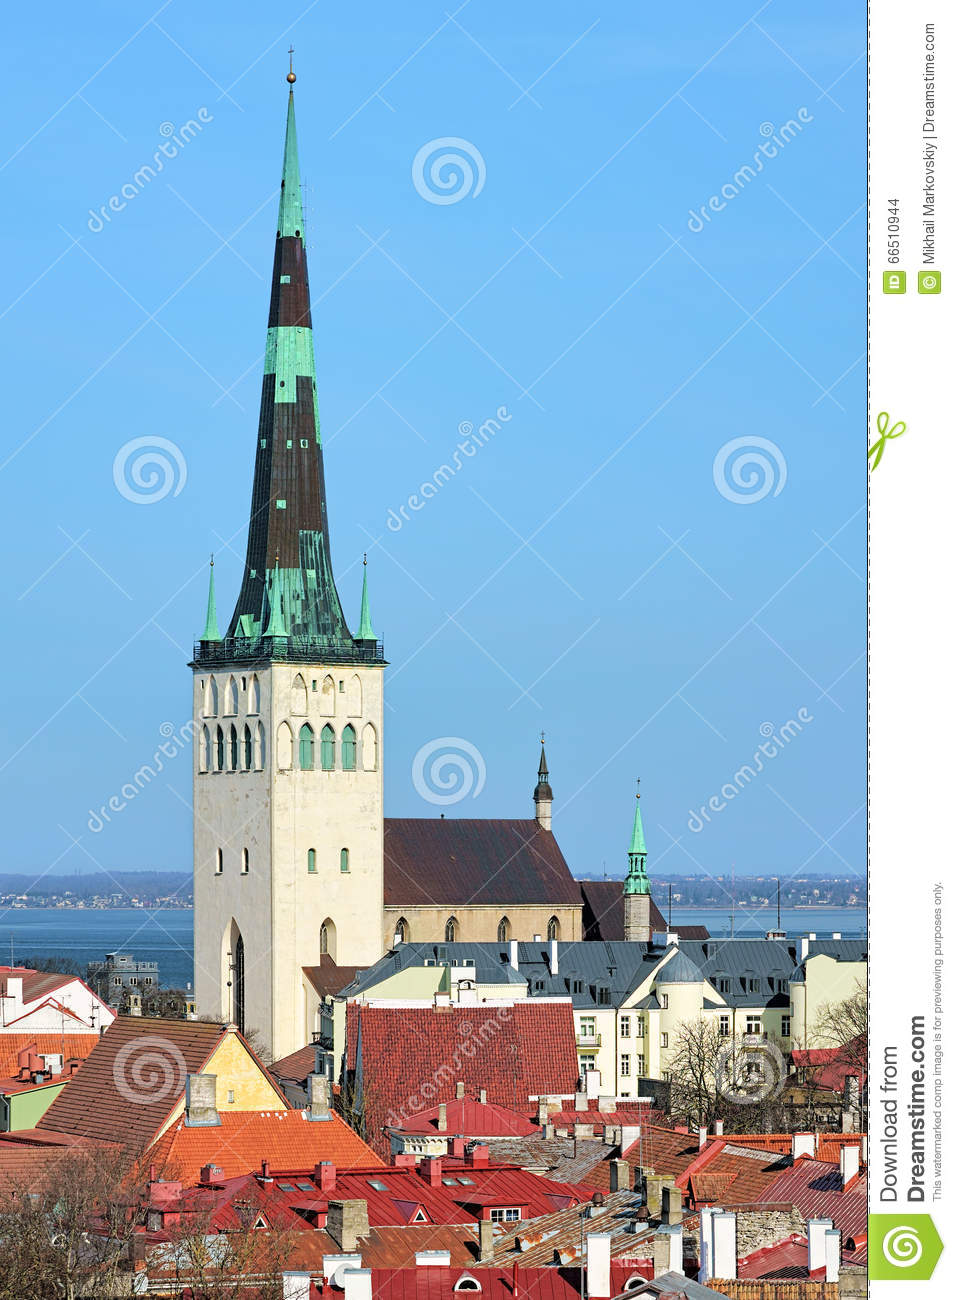 View Of The St. Olaf's Church In The Tallinn Old Town, Estonia.